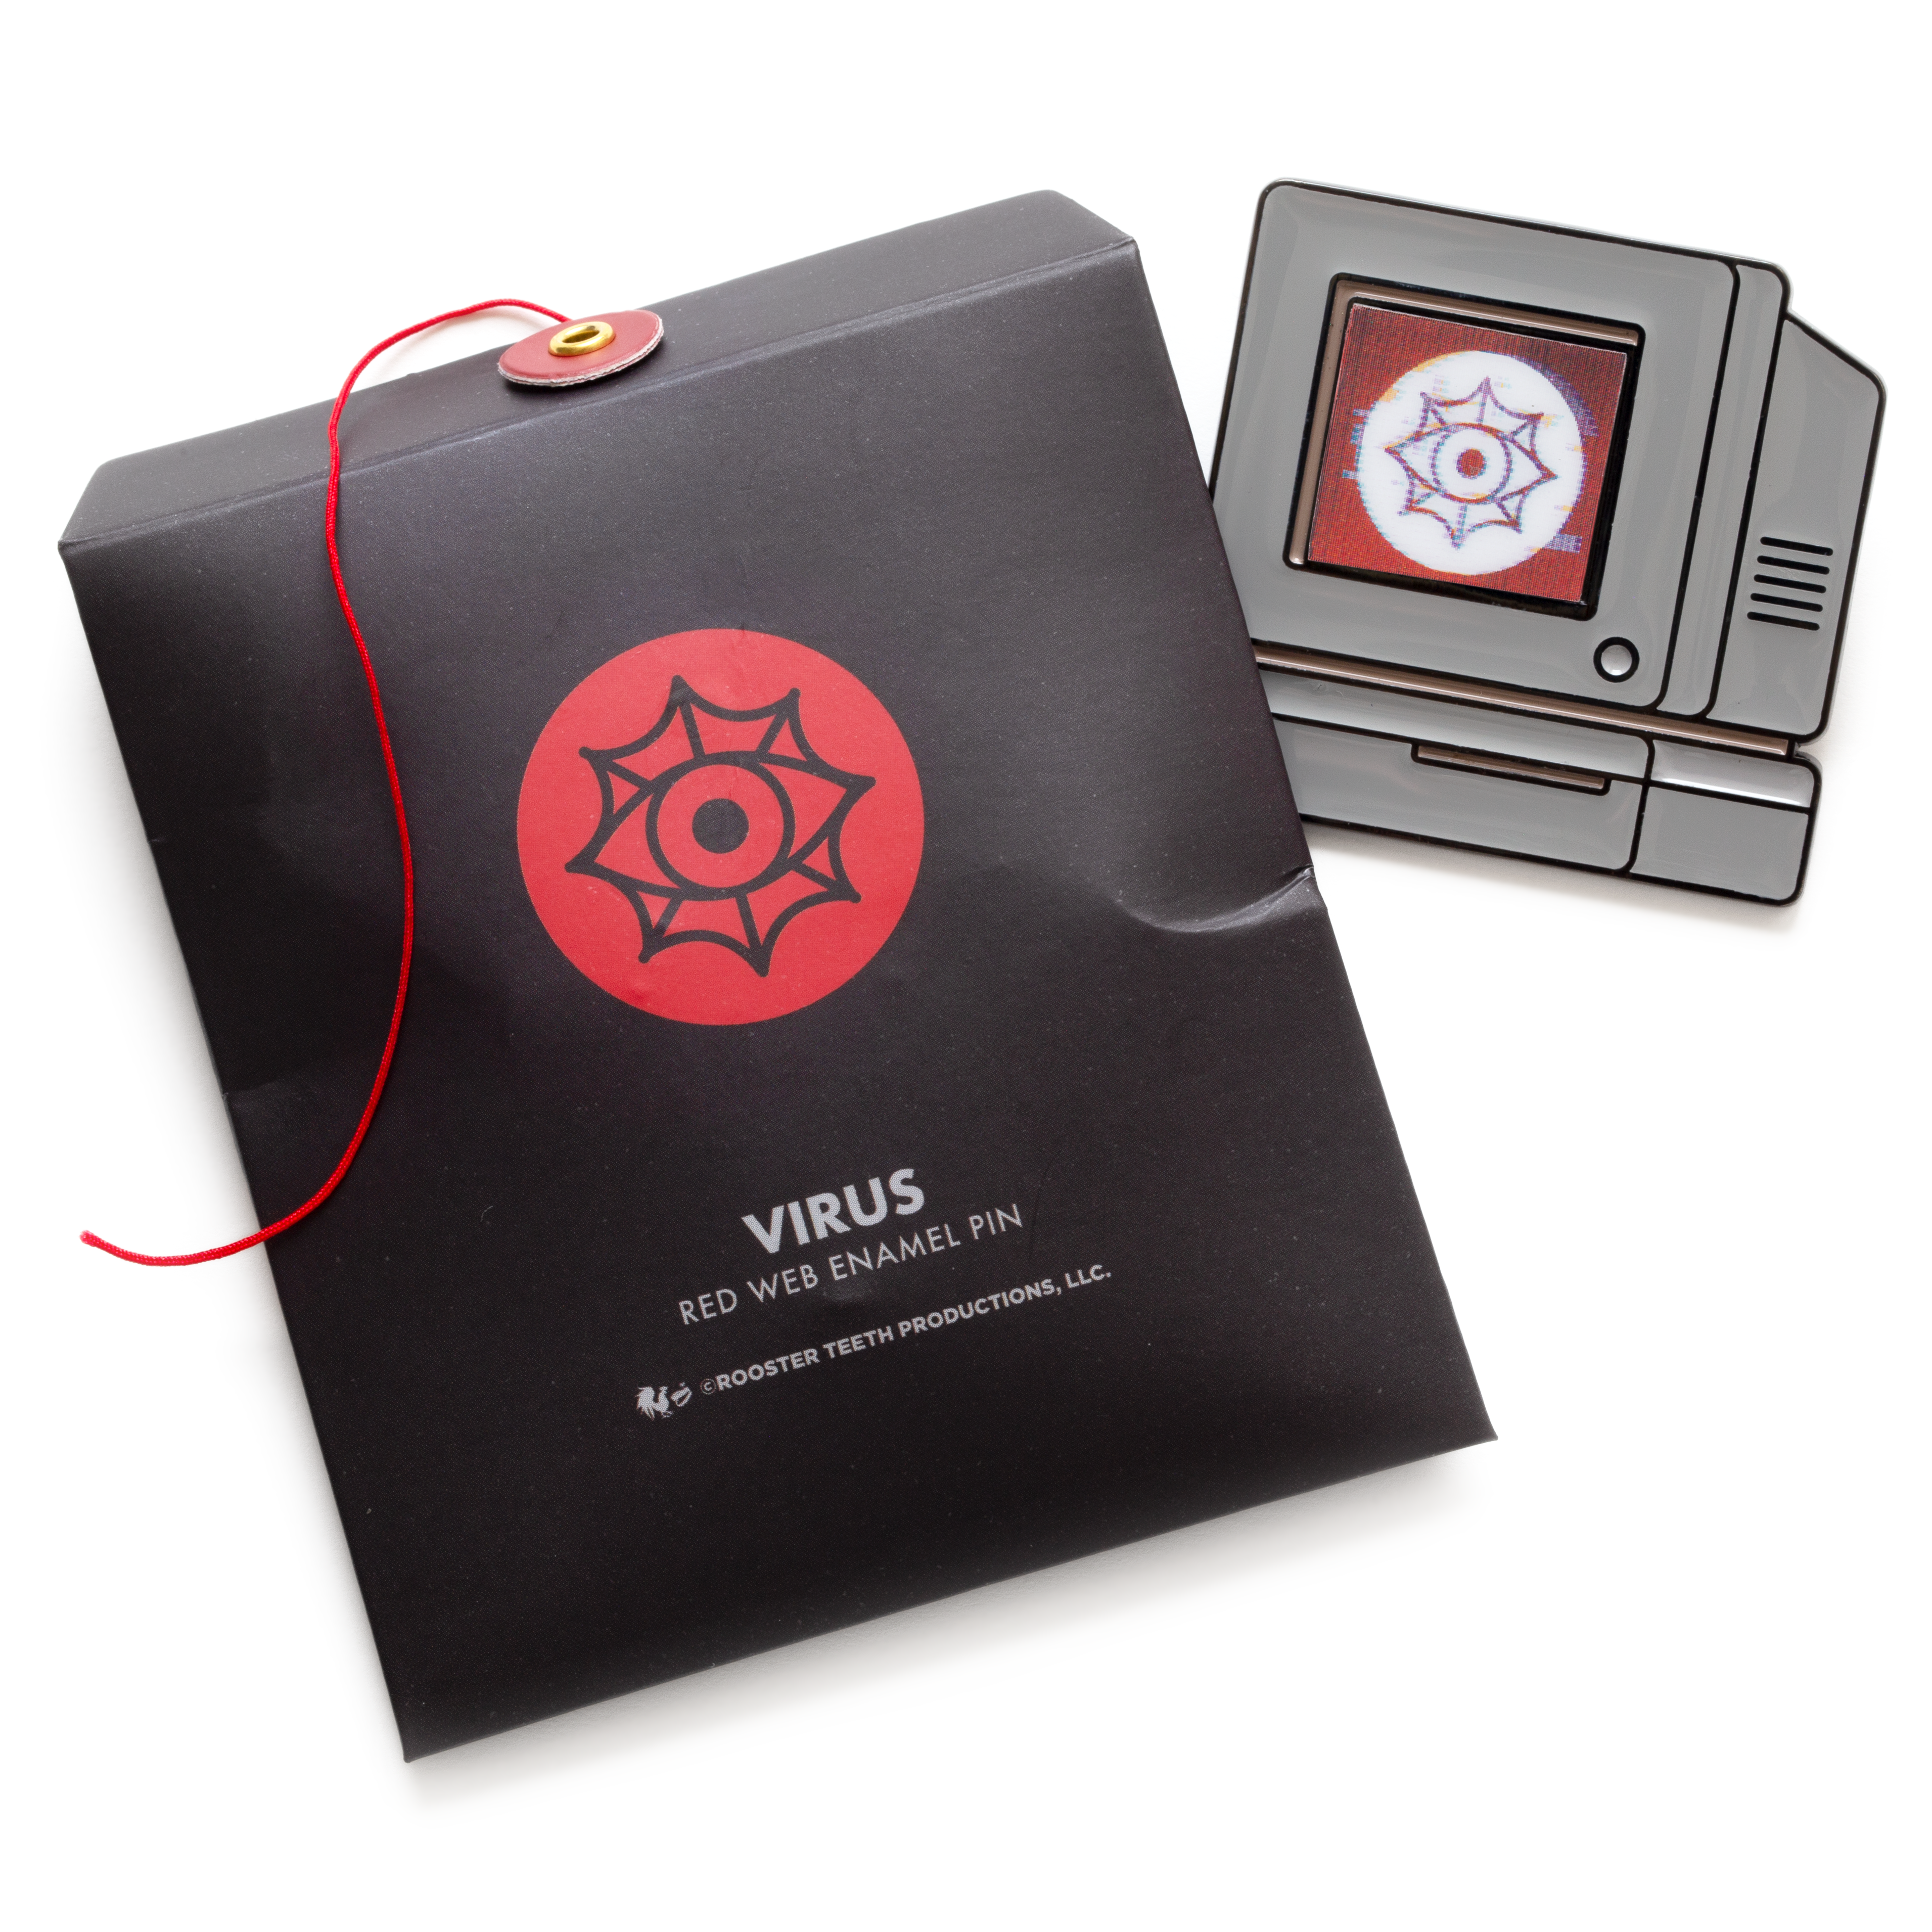 Red Web Monthly Pin - Virus Lenticular